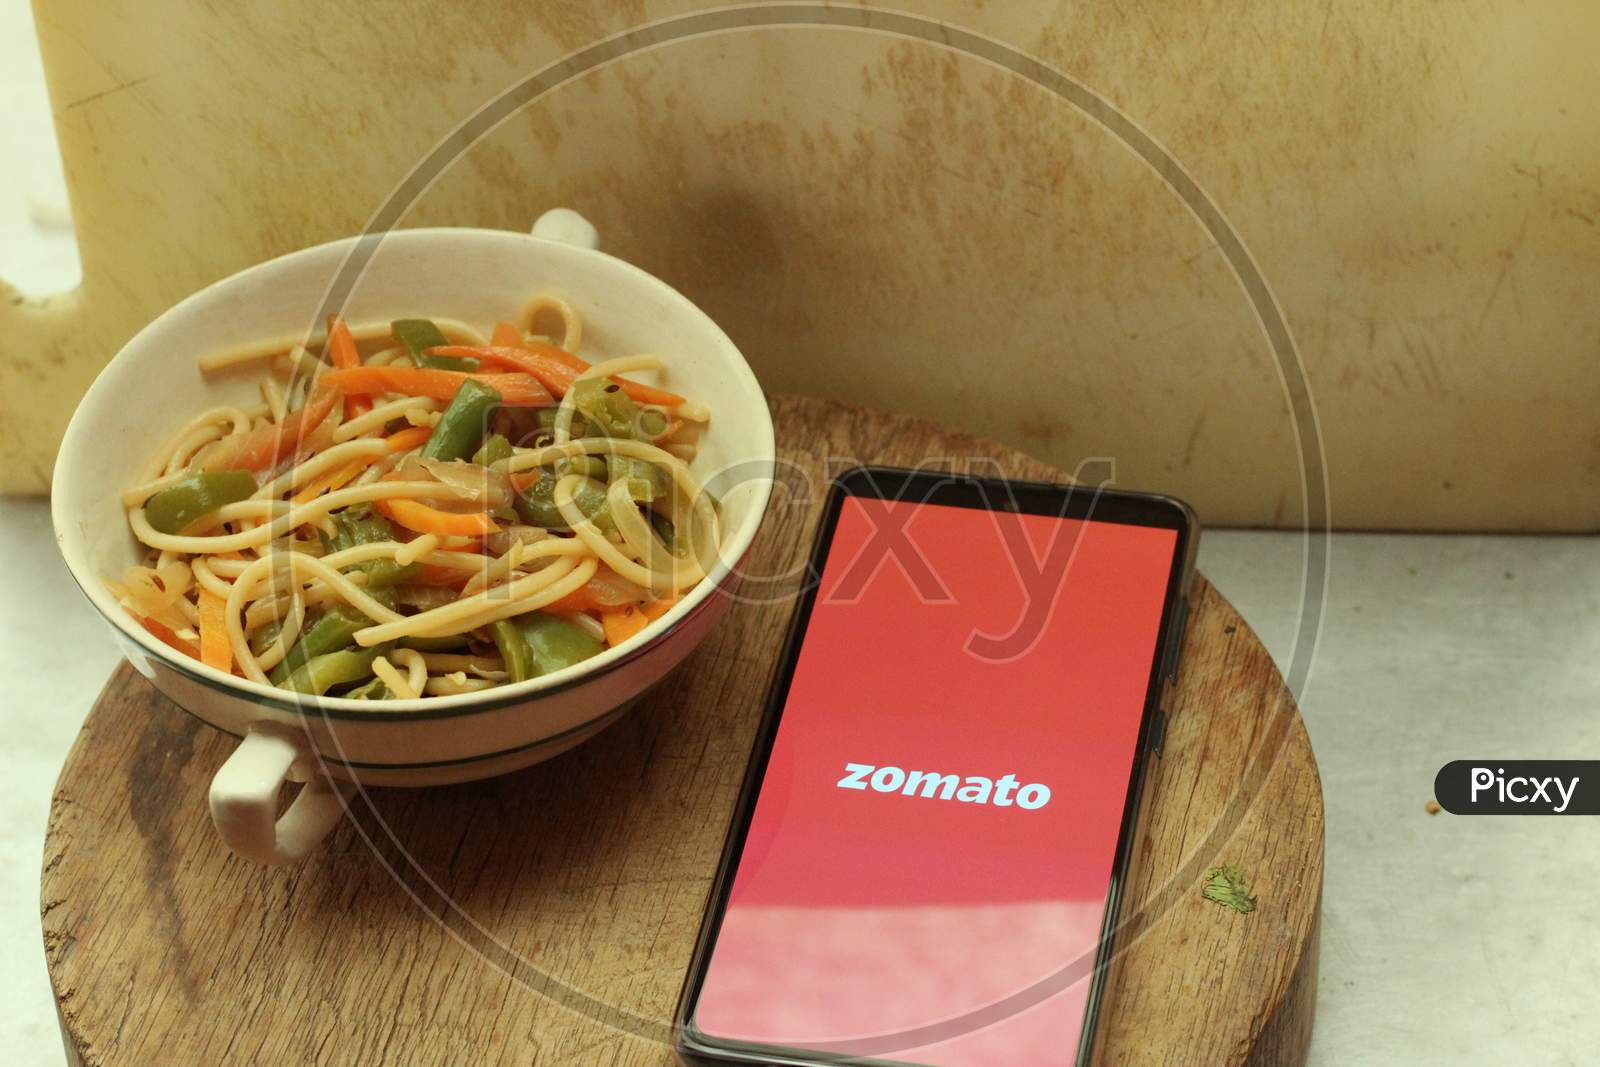 Zomato Food delivery application icon on smartphone